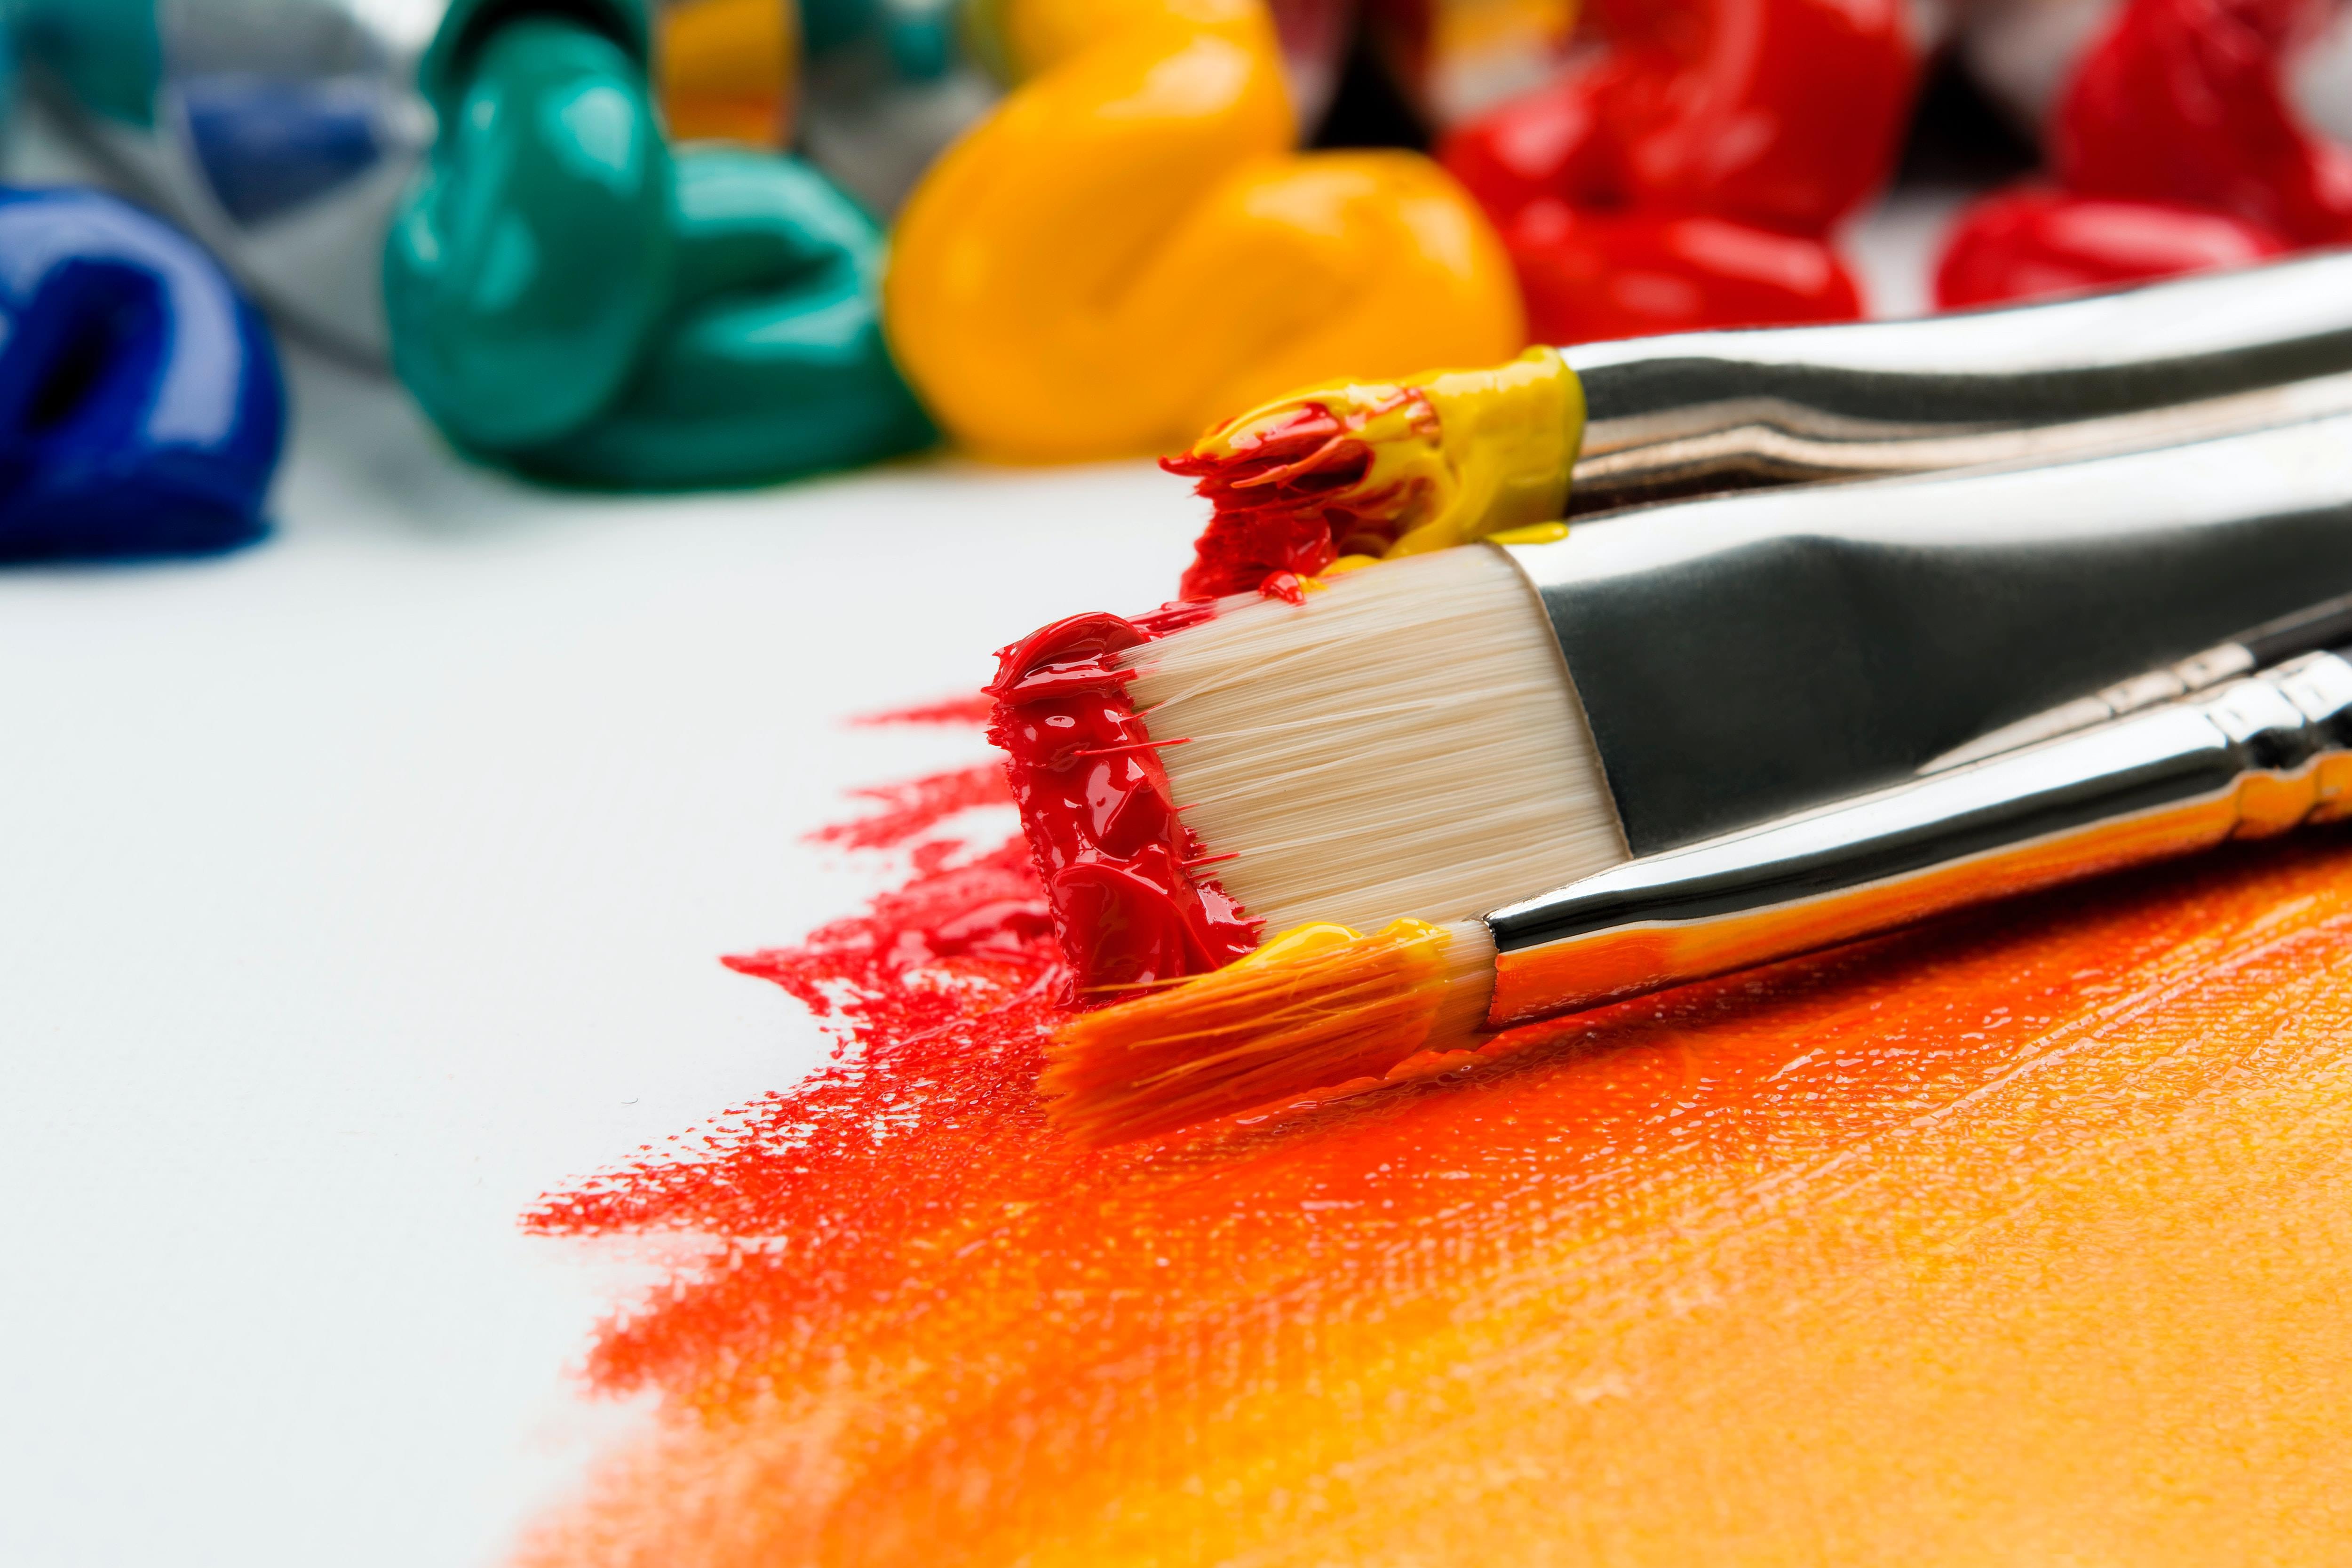 Paintbrushes and red, yellow, and orange paint in the foreground, green and blue paint in the background